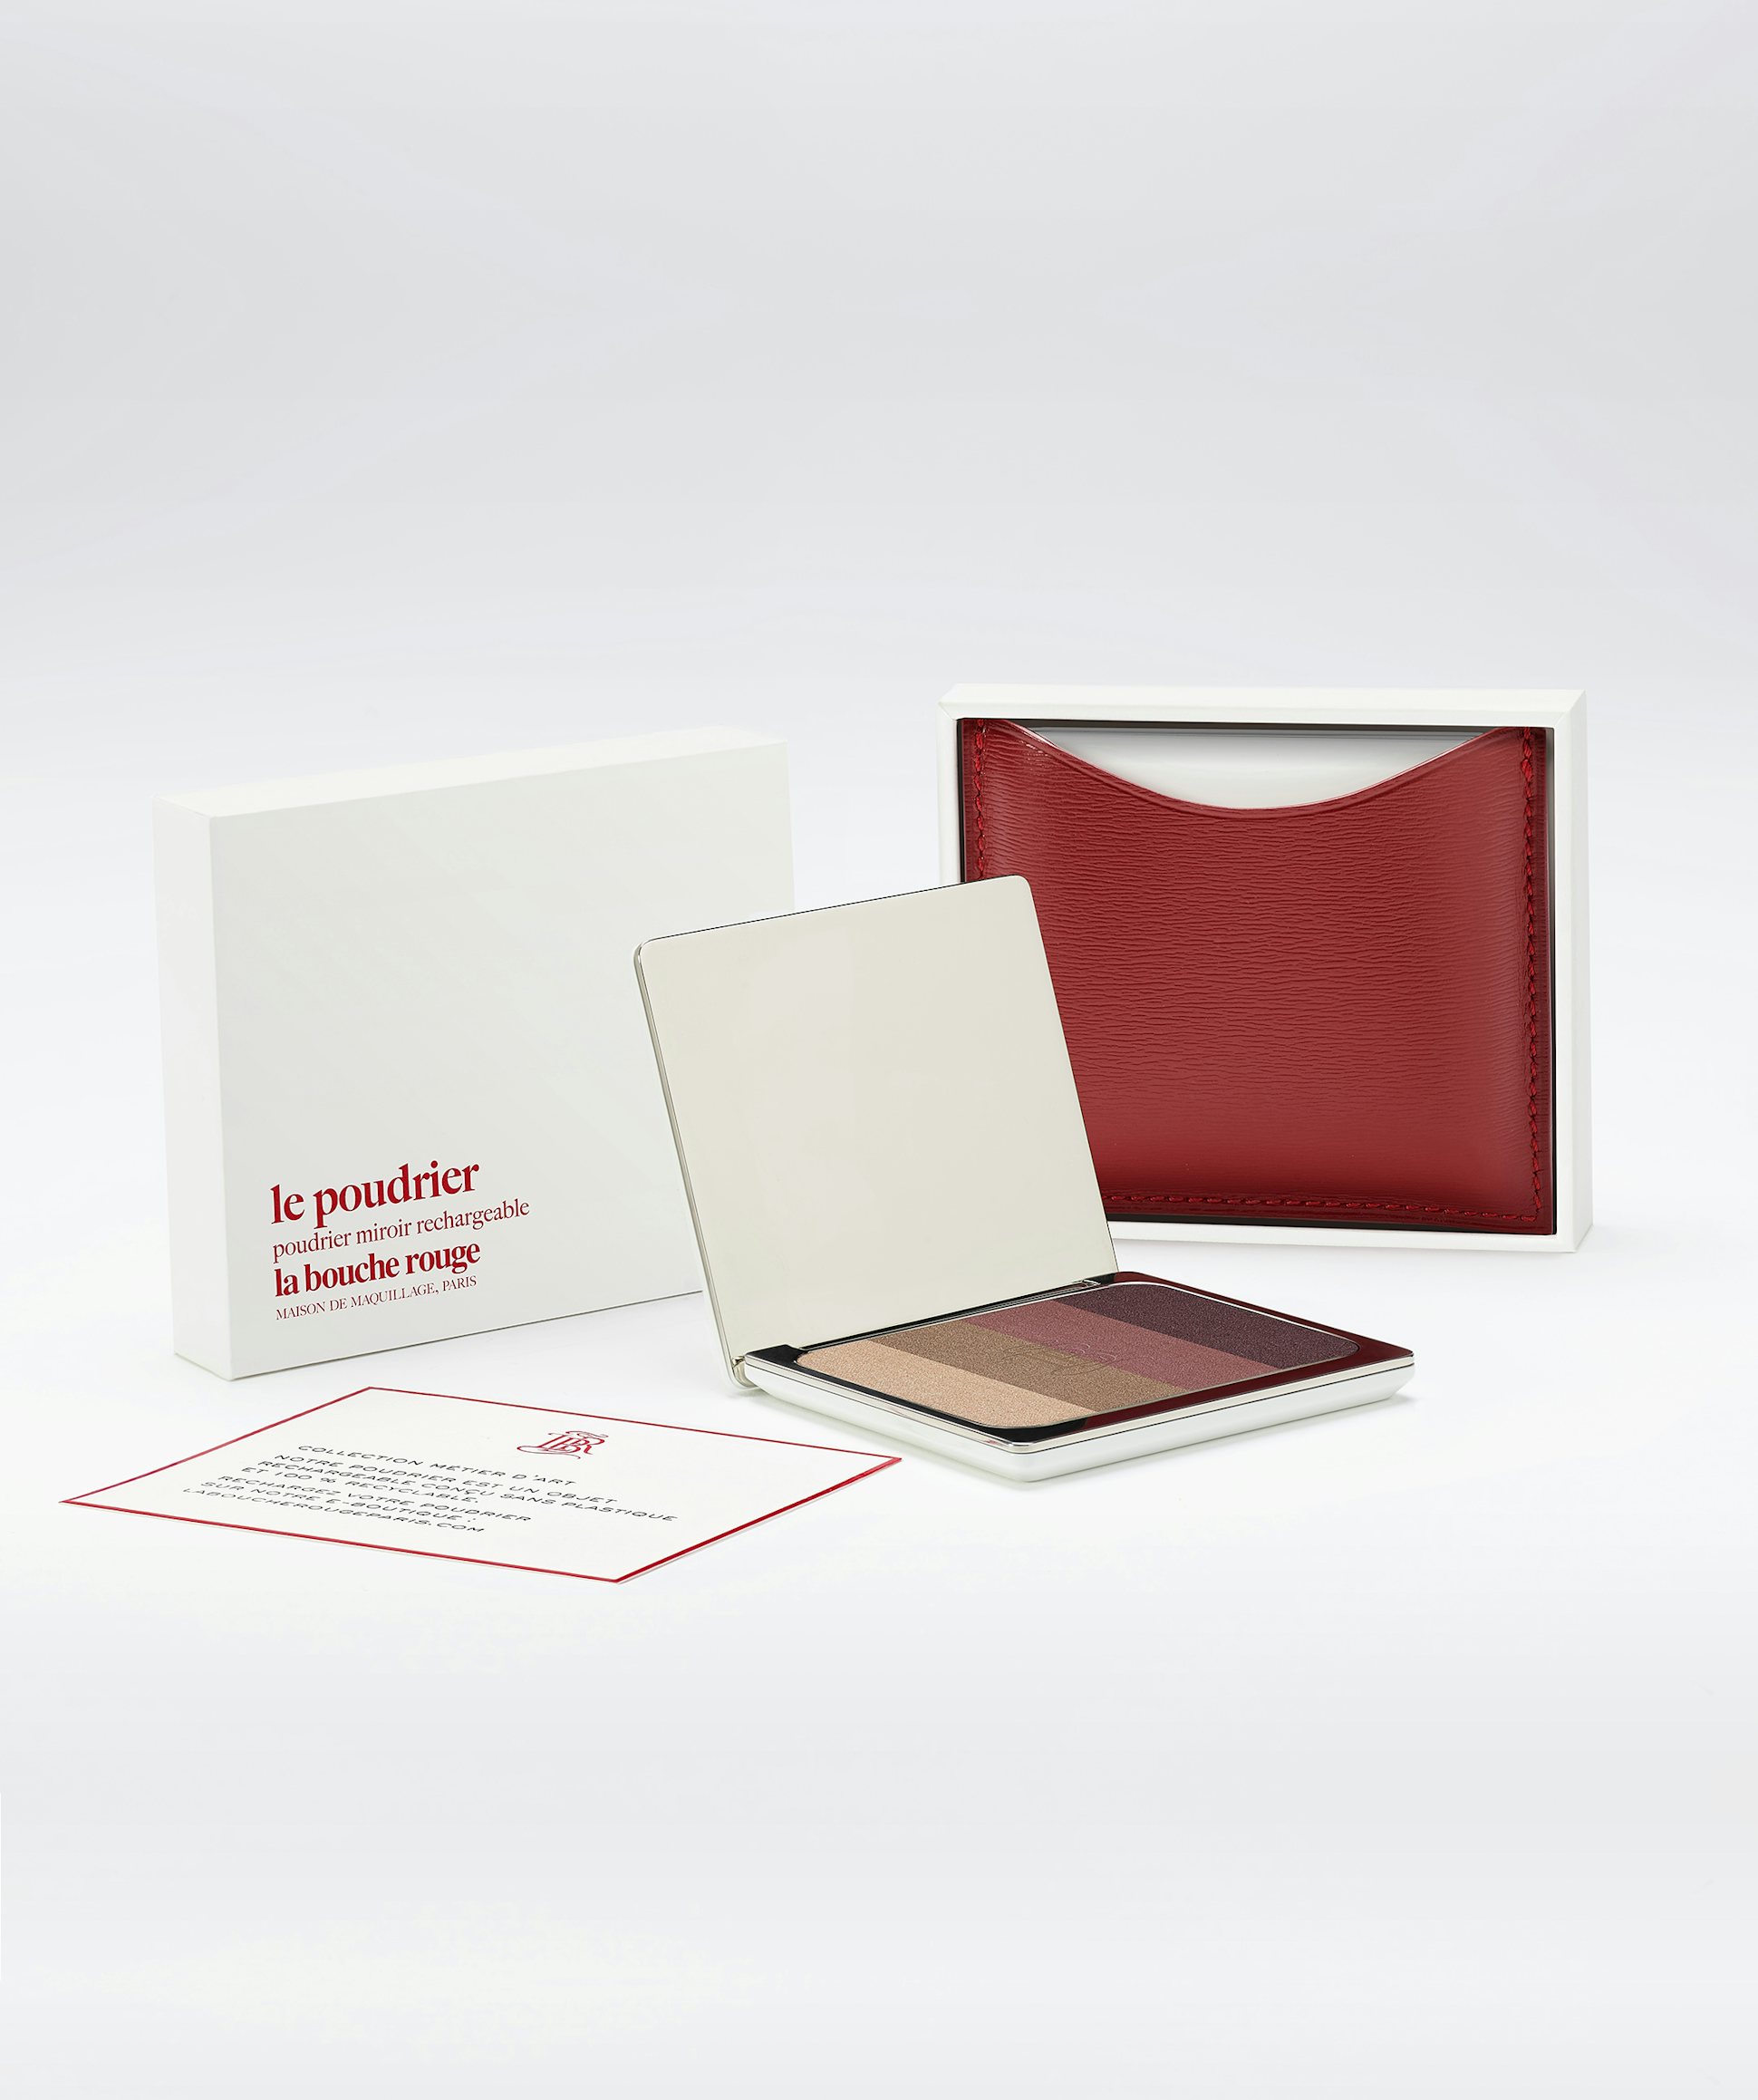 La bouche rouge, Paris Les Ombres Chilwa in the red fine leather compact case